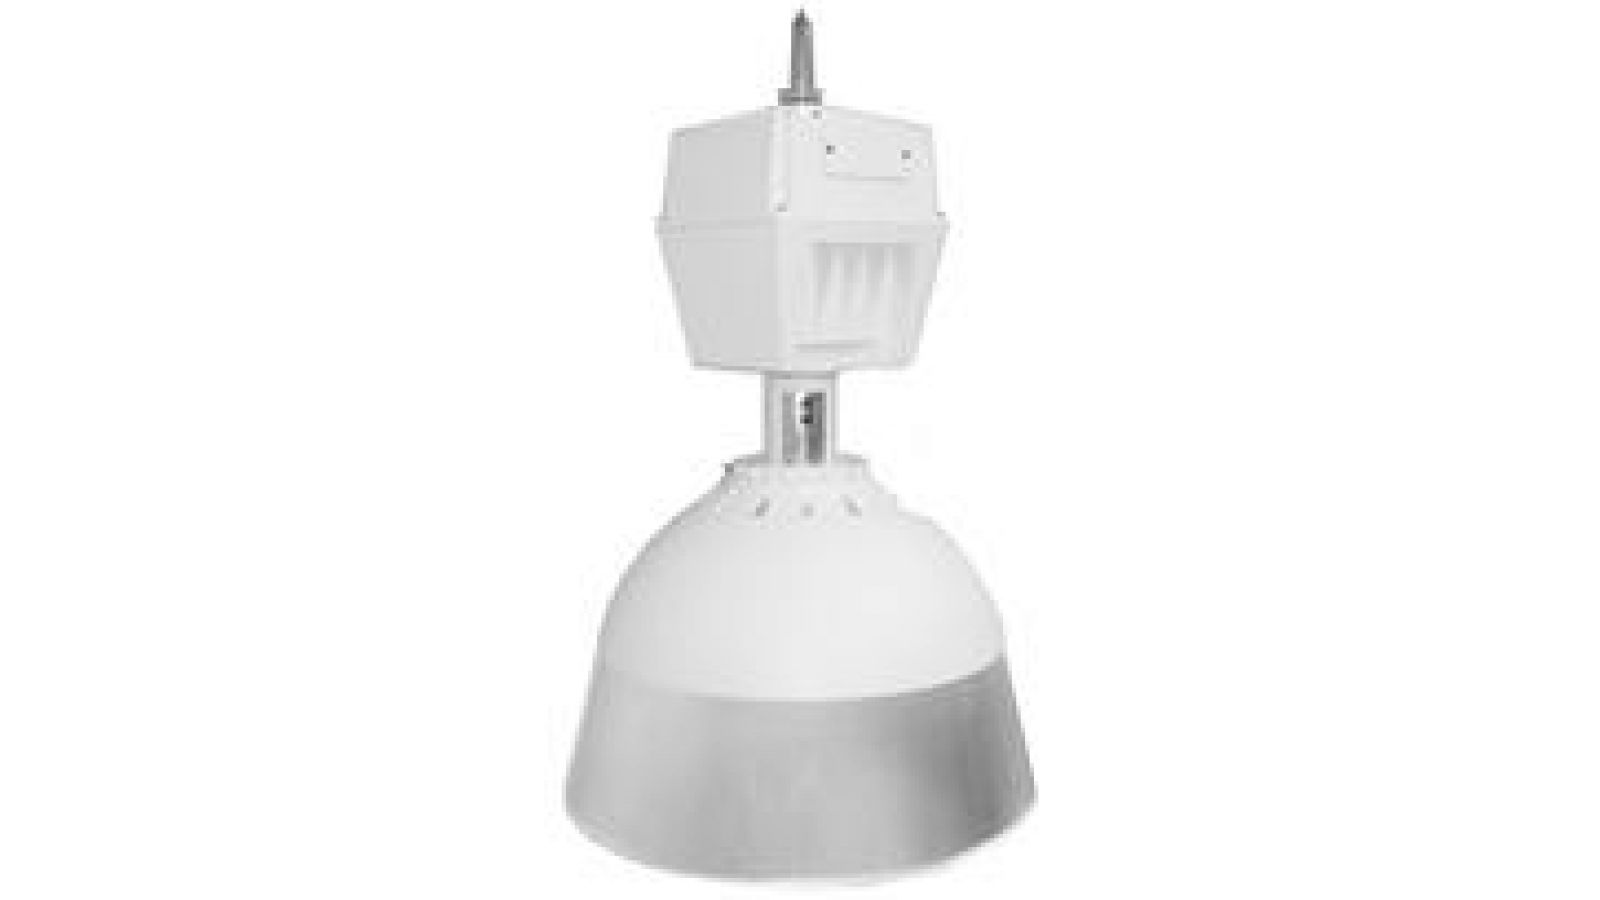 Exceed Magnetic 575W High-Bay Luminaire